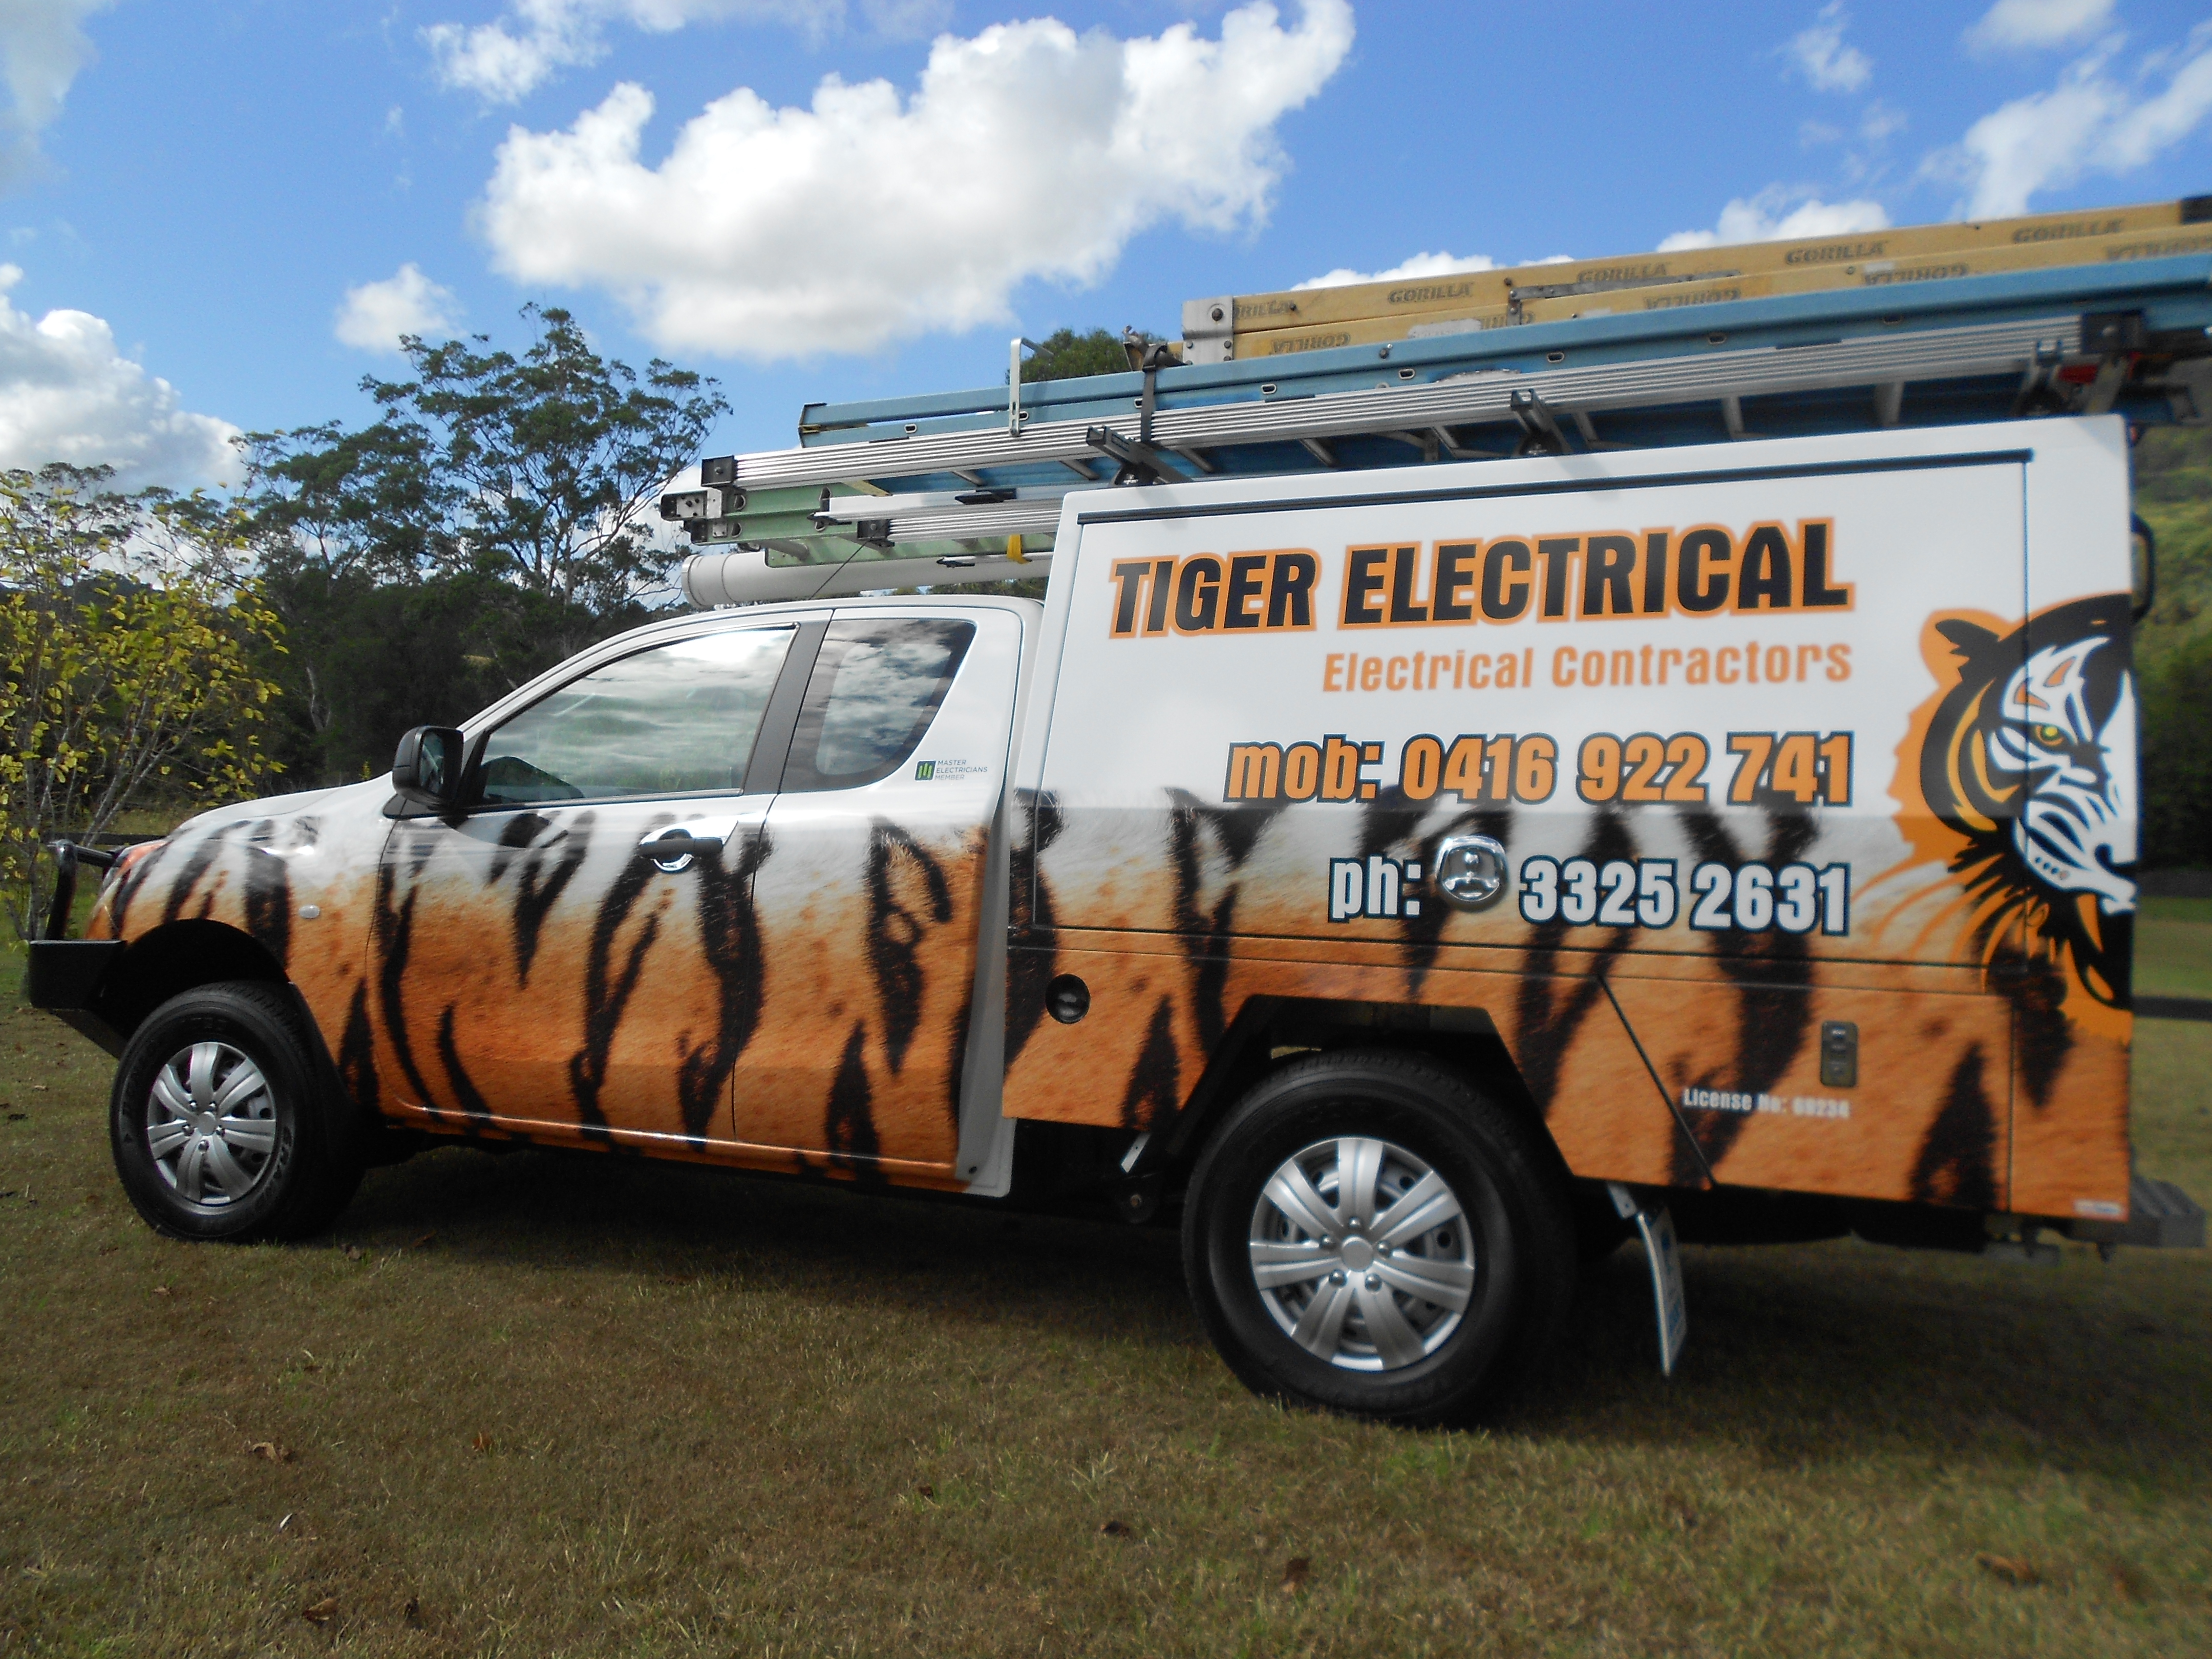 Tiger Electrical